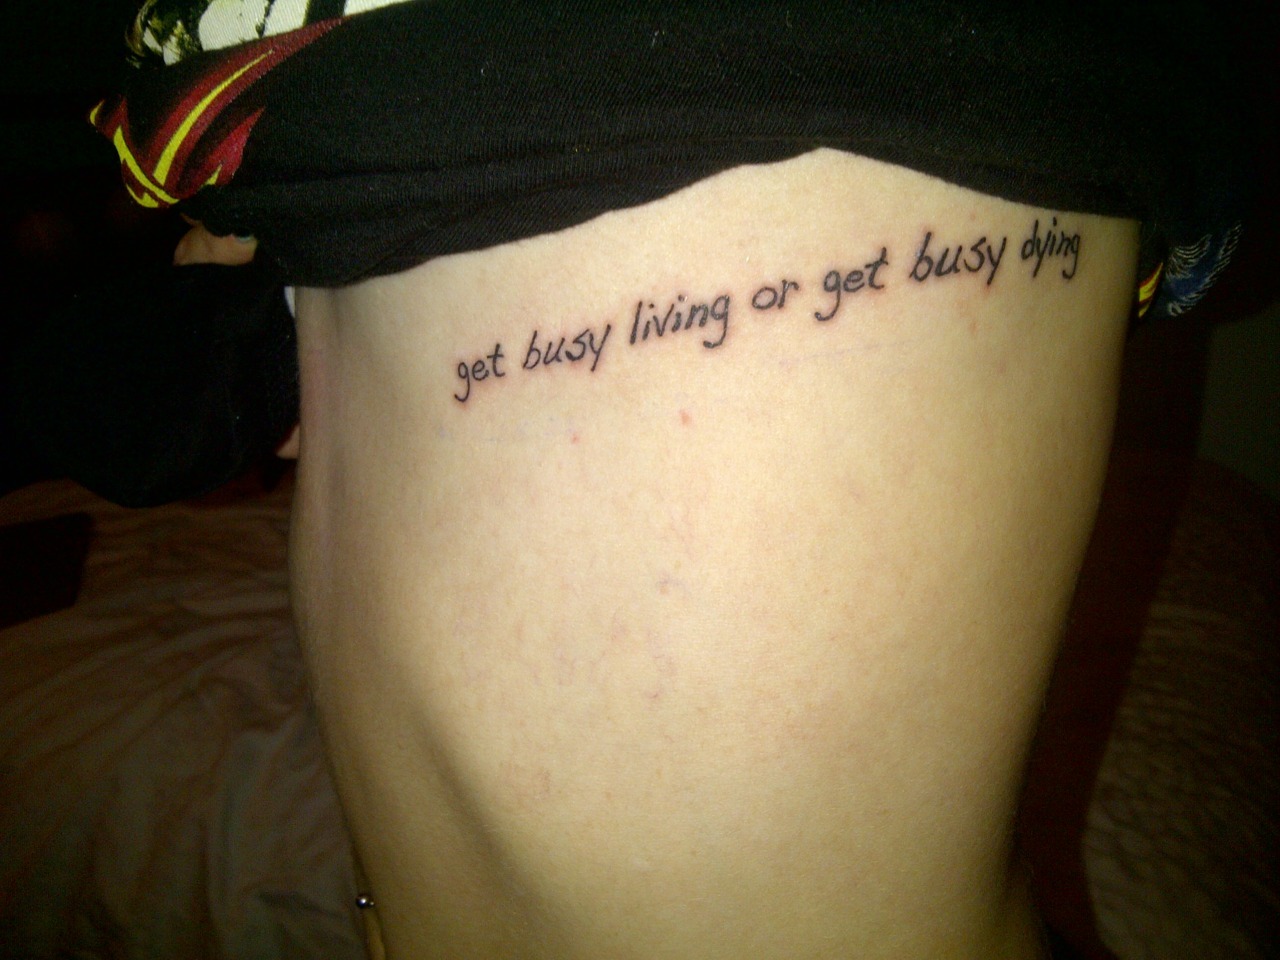 Get busy livin or get busy dying tattoo